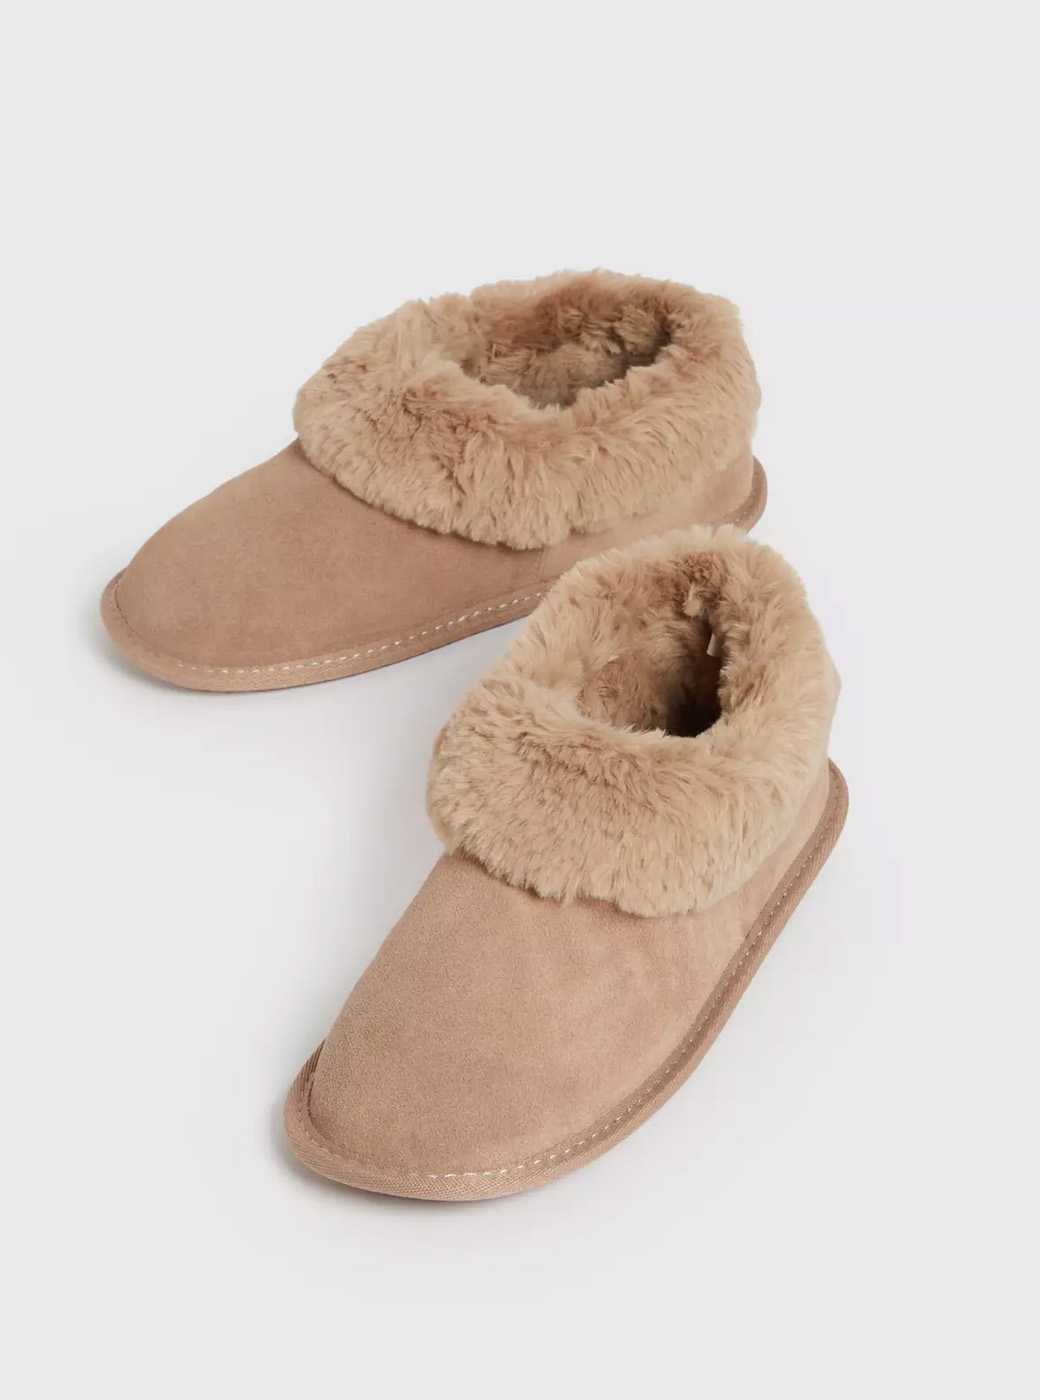 Shop slippers.